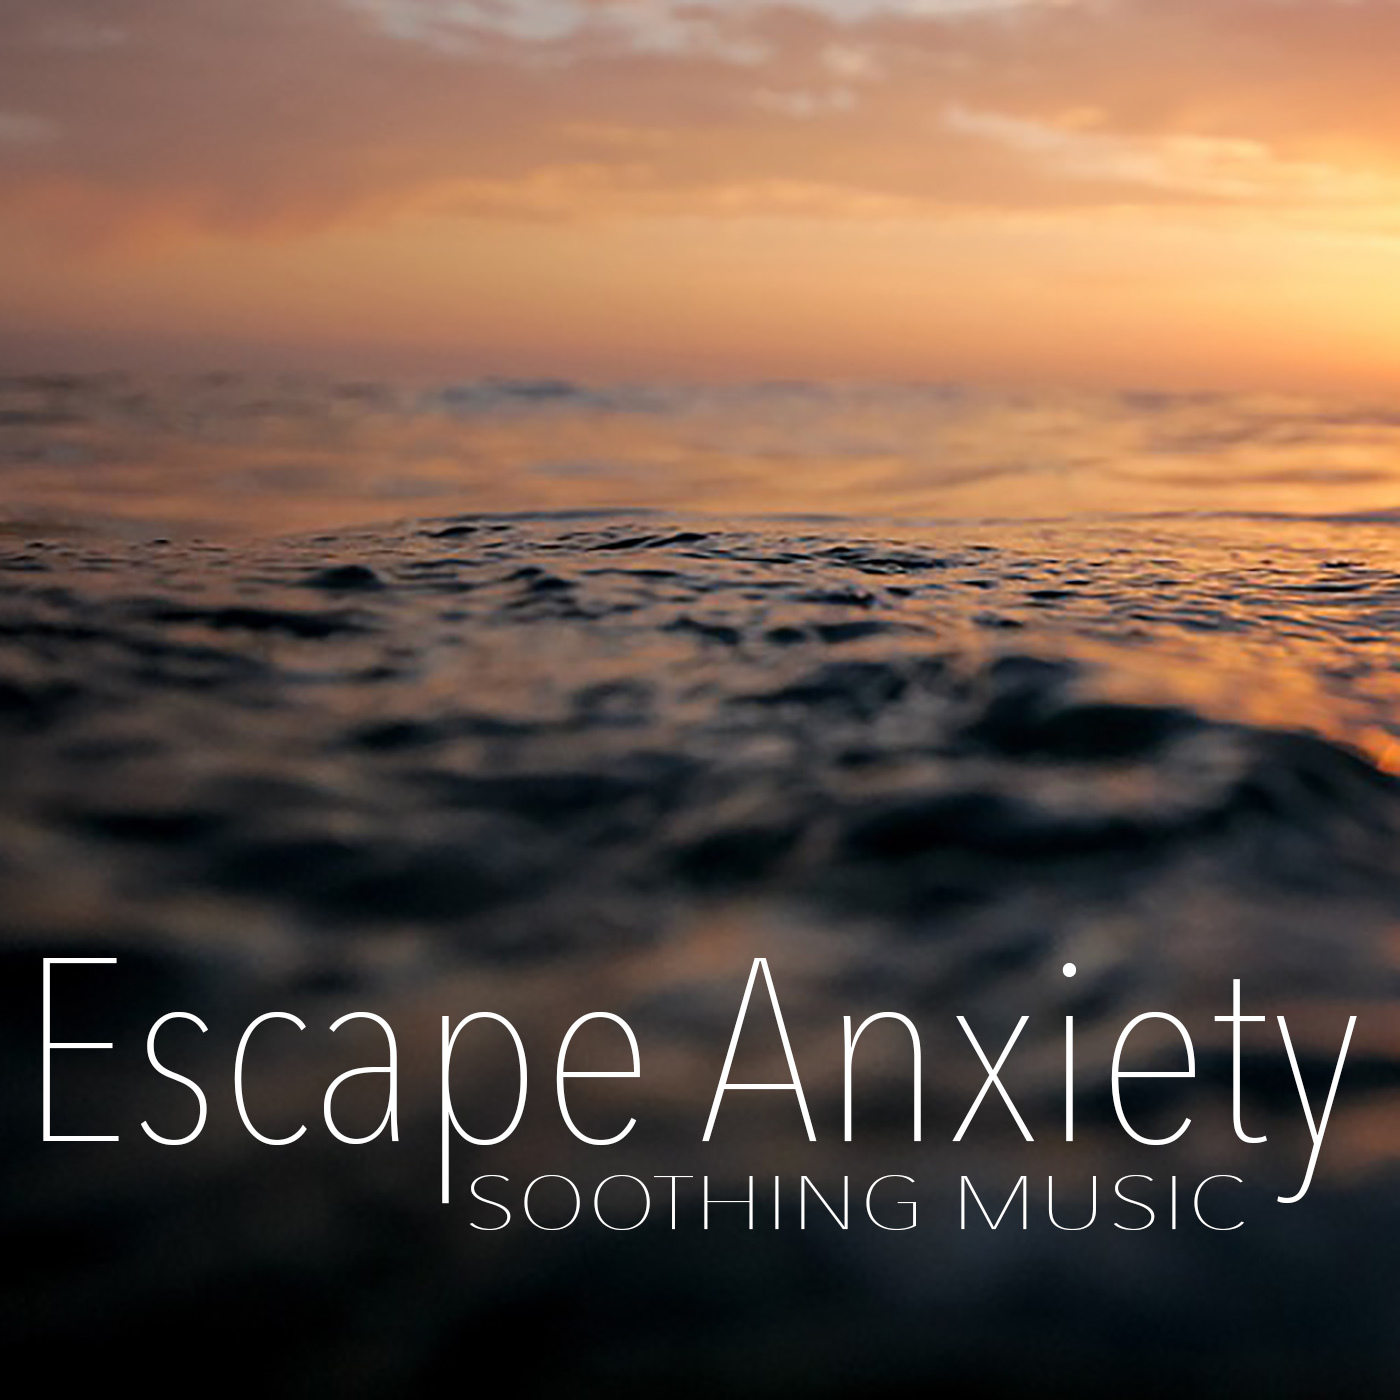 Escape Anxiety Soothing Music